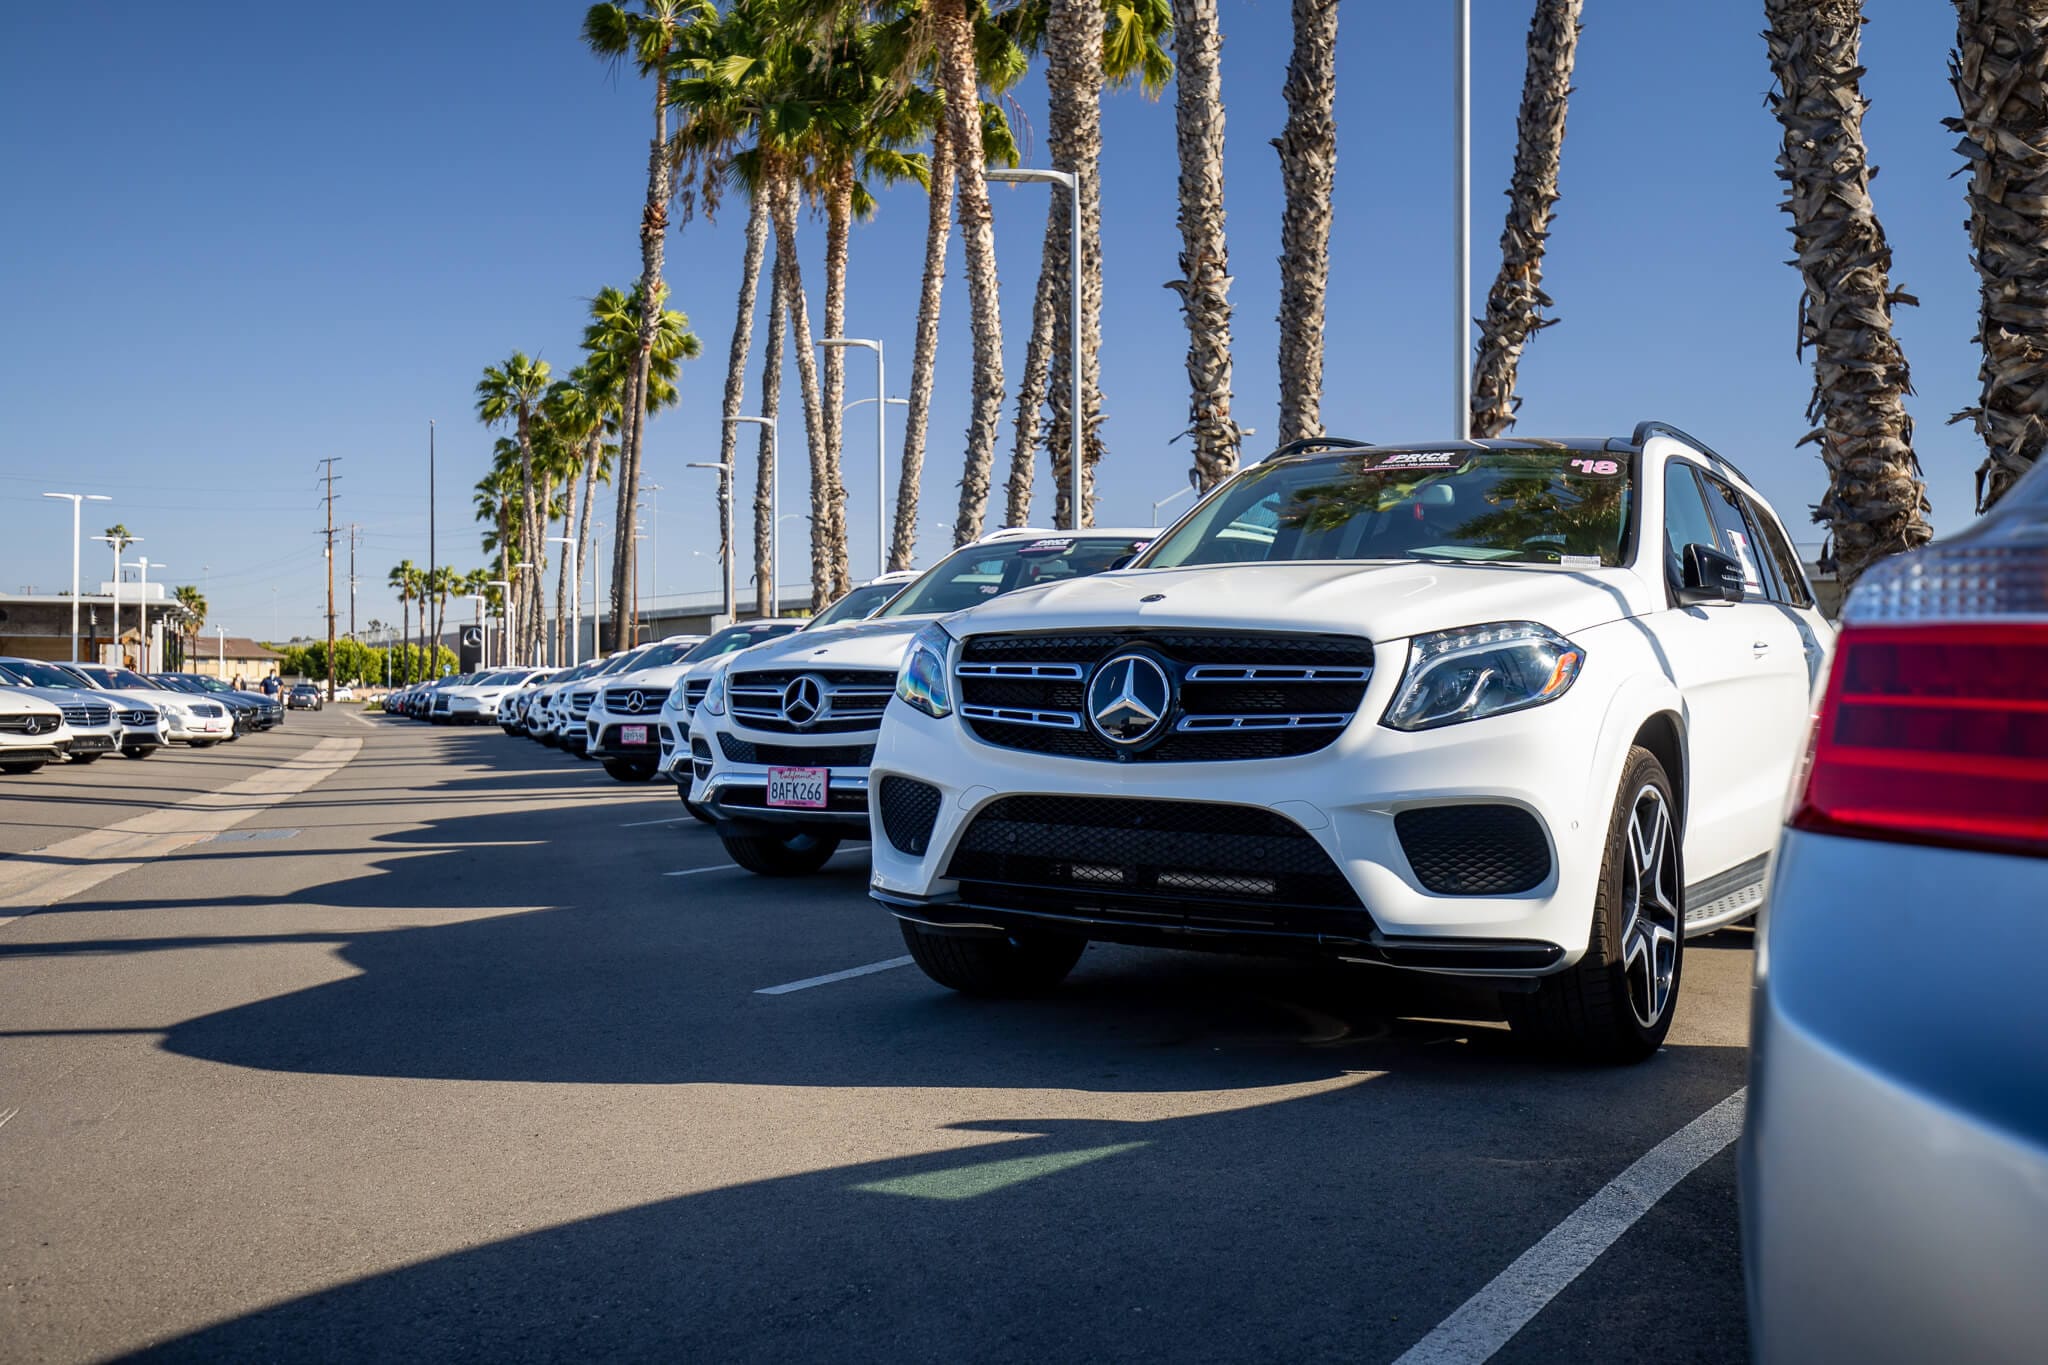 A row of Mercedes-Benz vehicles preen in the sunshine